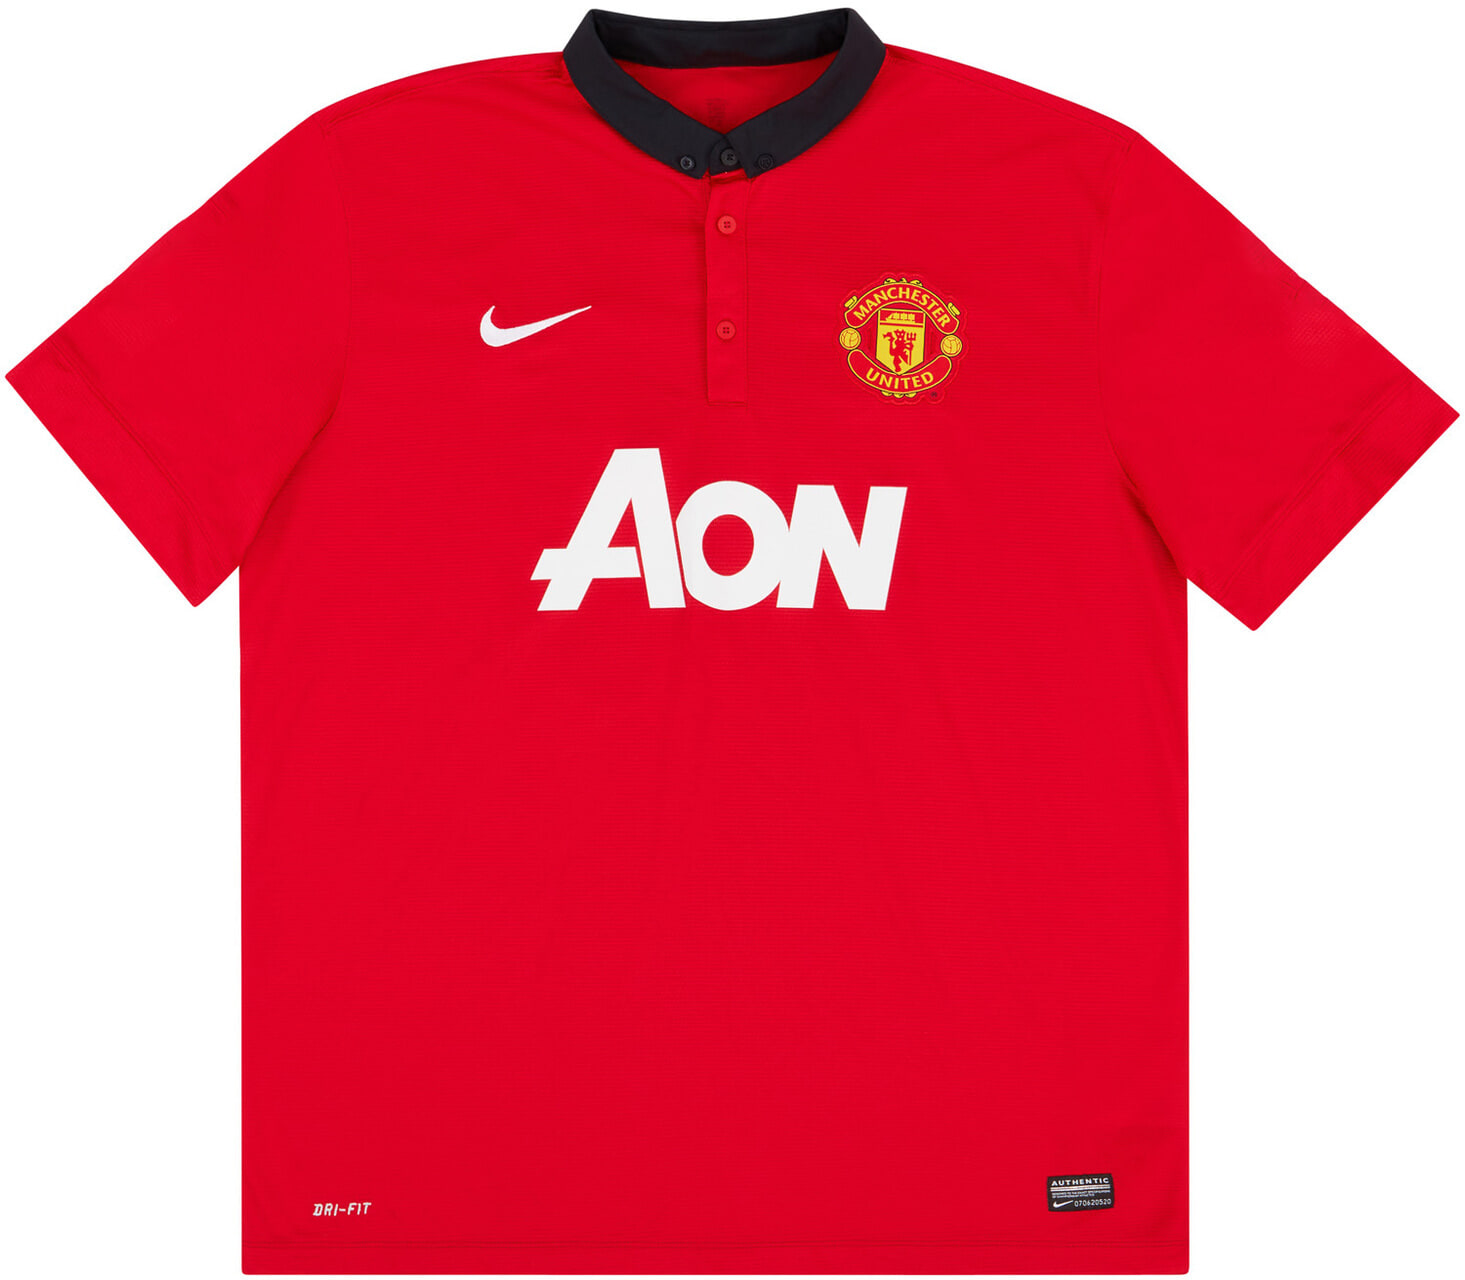 2013-14 Manchester United Home Shirt - 6/10 -